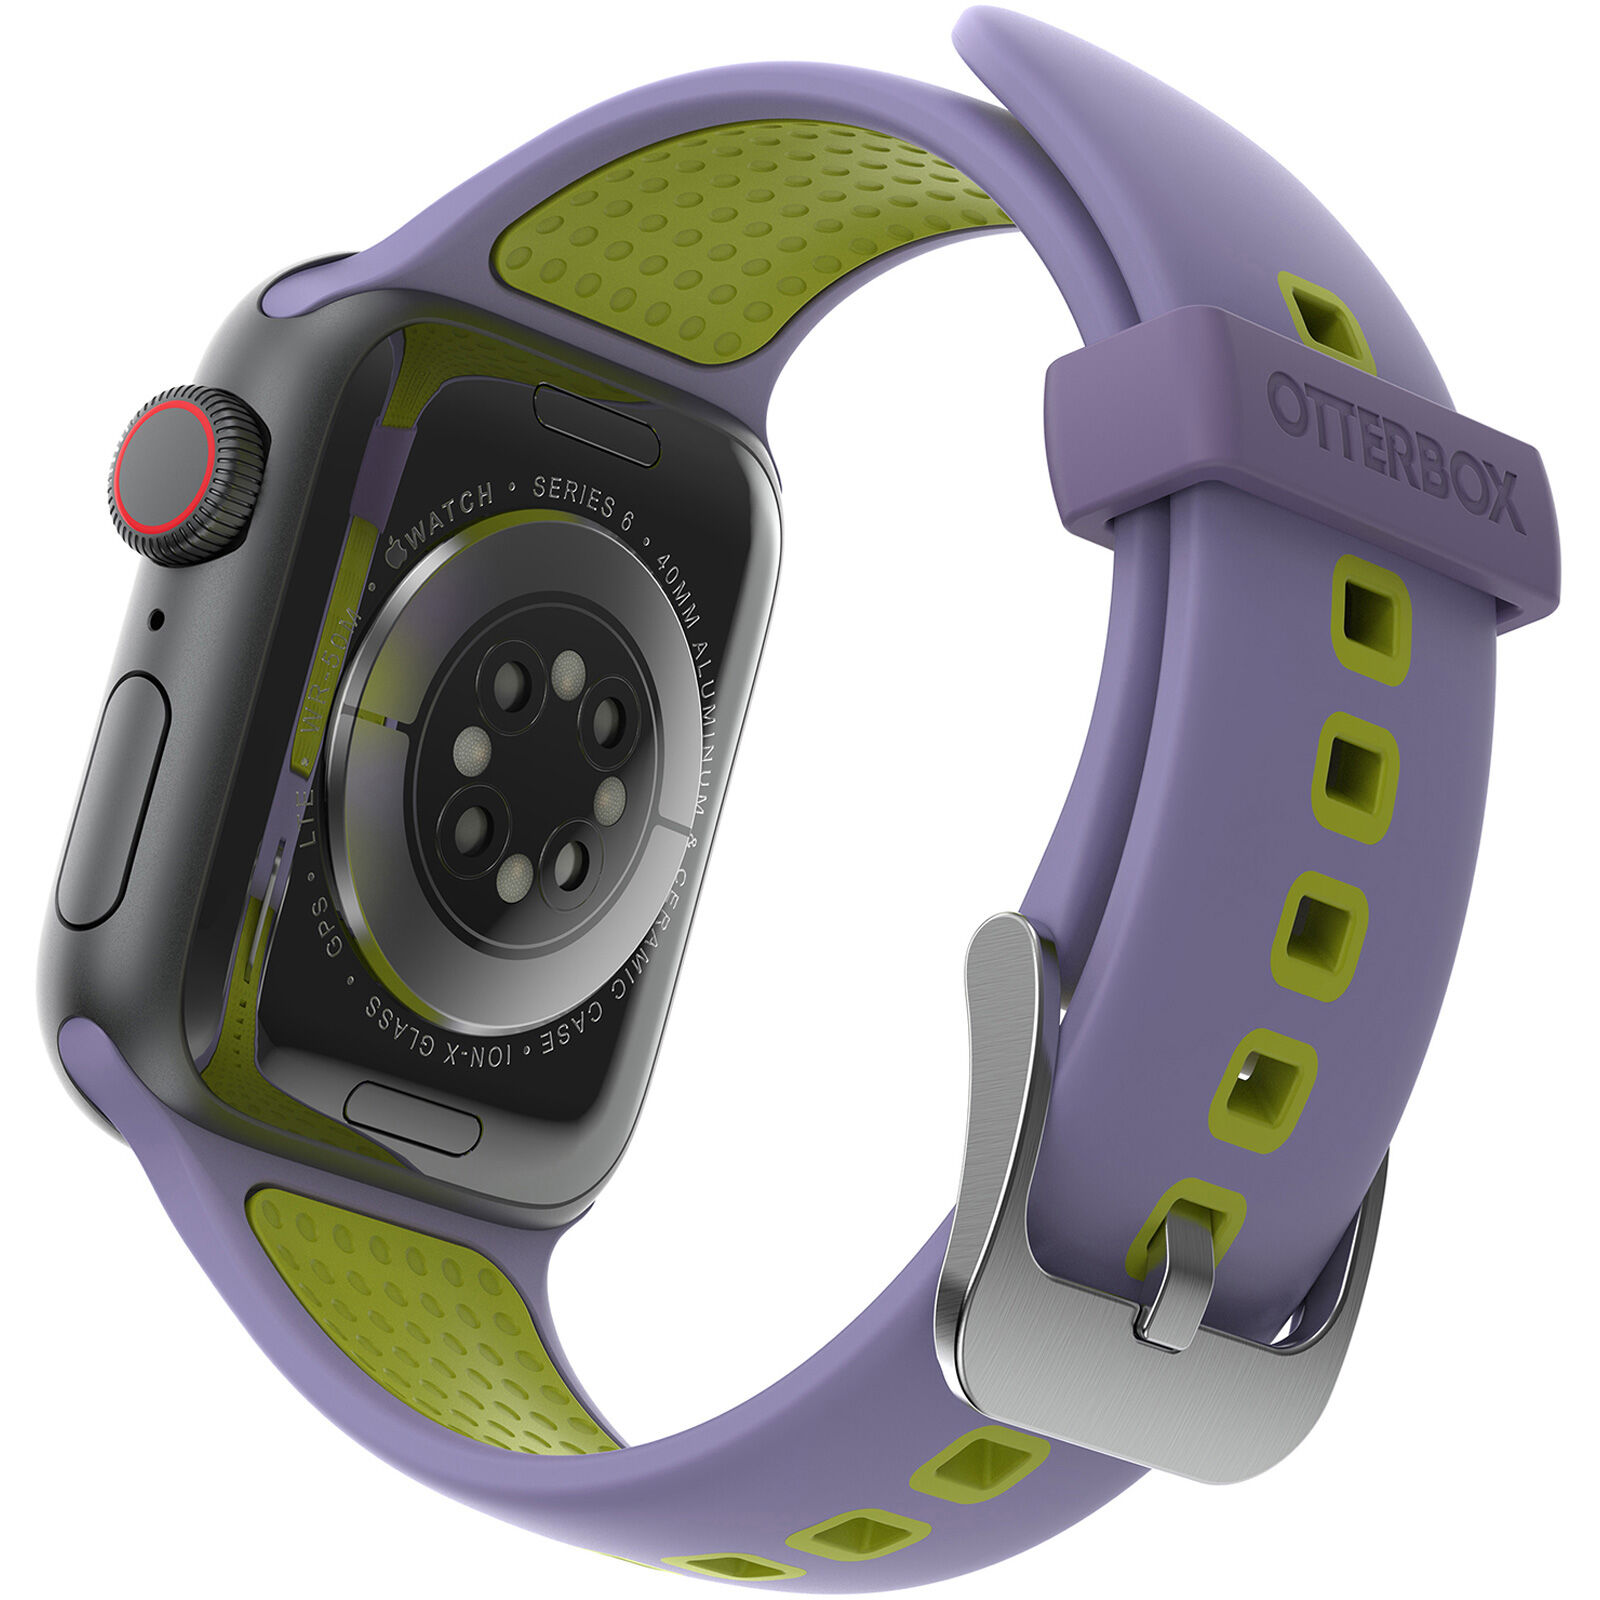 Apple Watch Wrist Band | Comfortable, Durable OtterBox Band